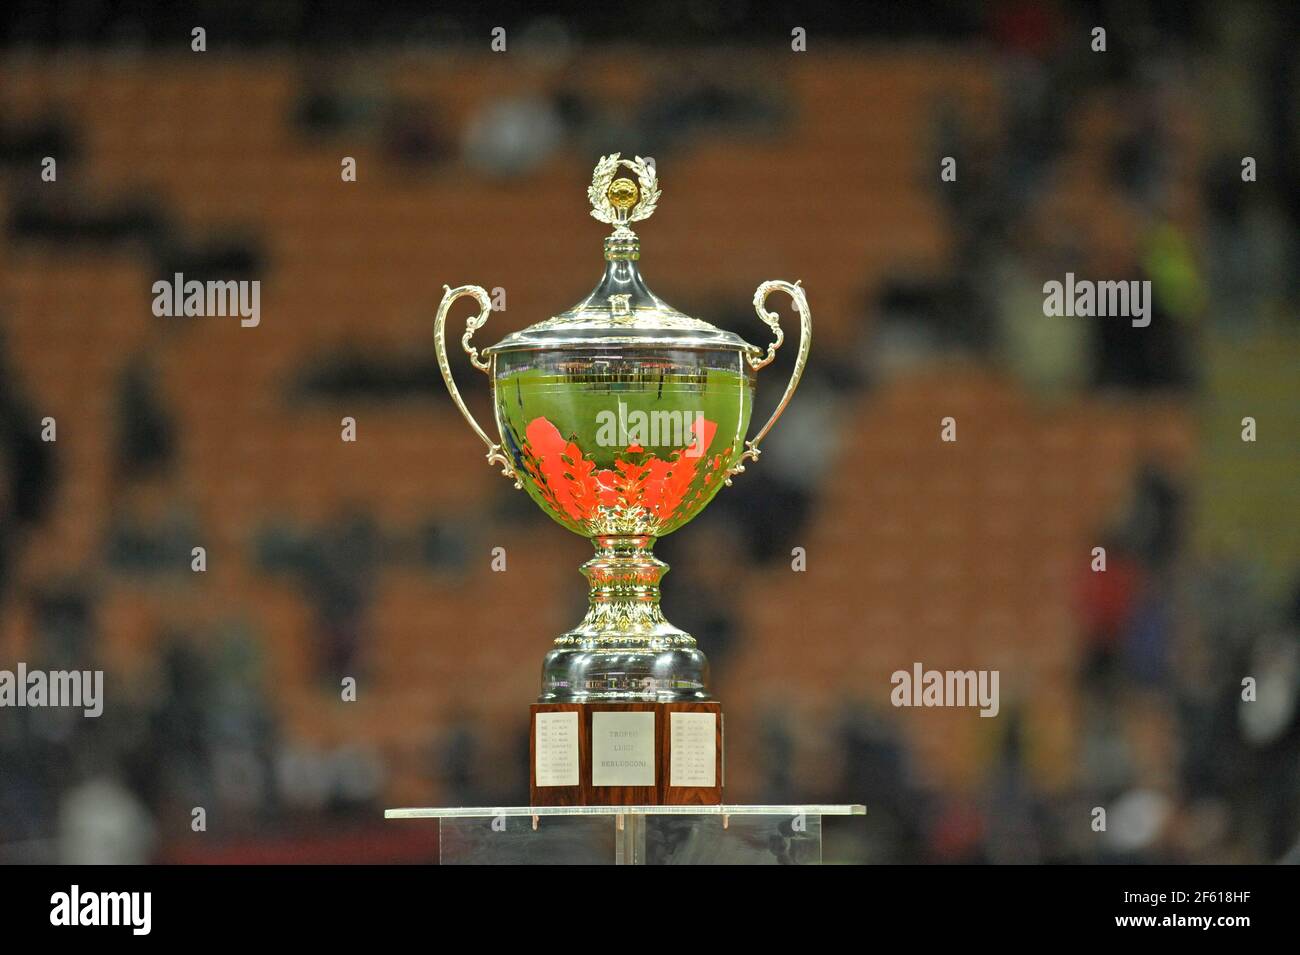 Trophy cup at the San Siro football stadium during the award ceremony of the Luigi Berlusconi's trophy, in Milan. Italy. Stock Photo